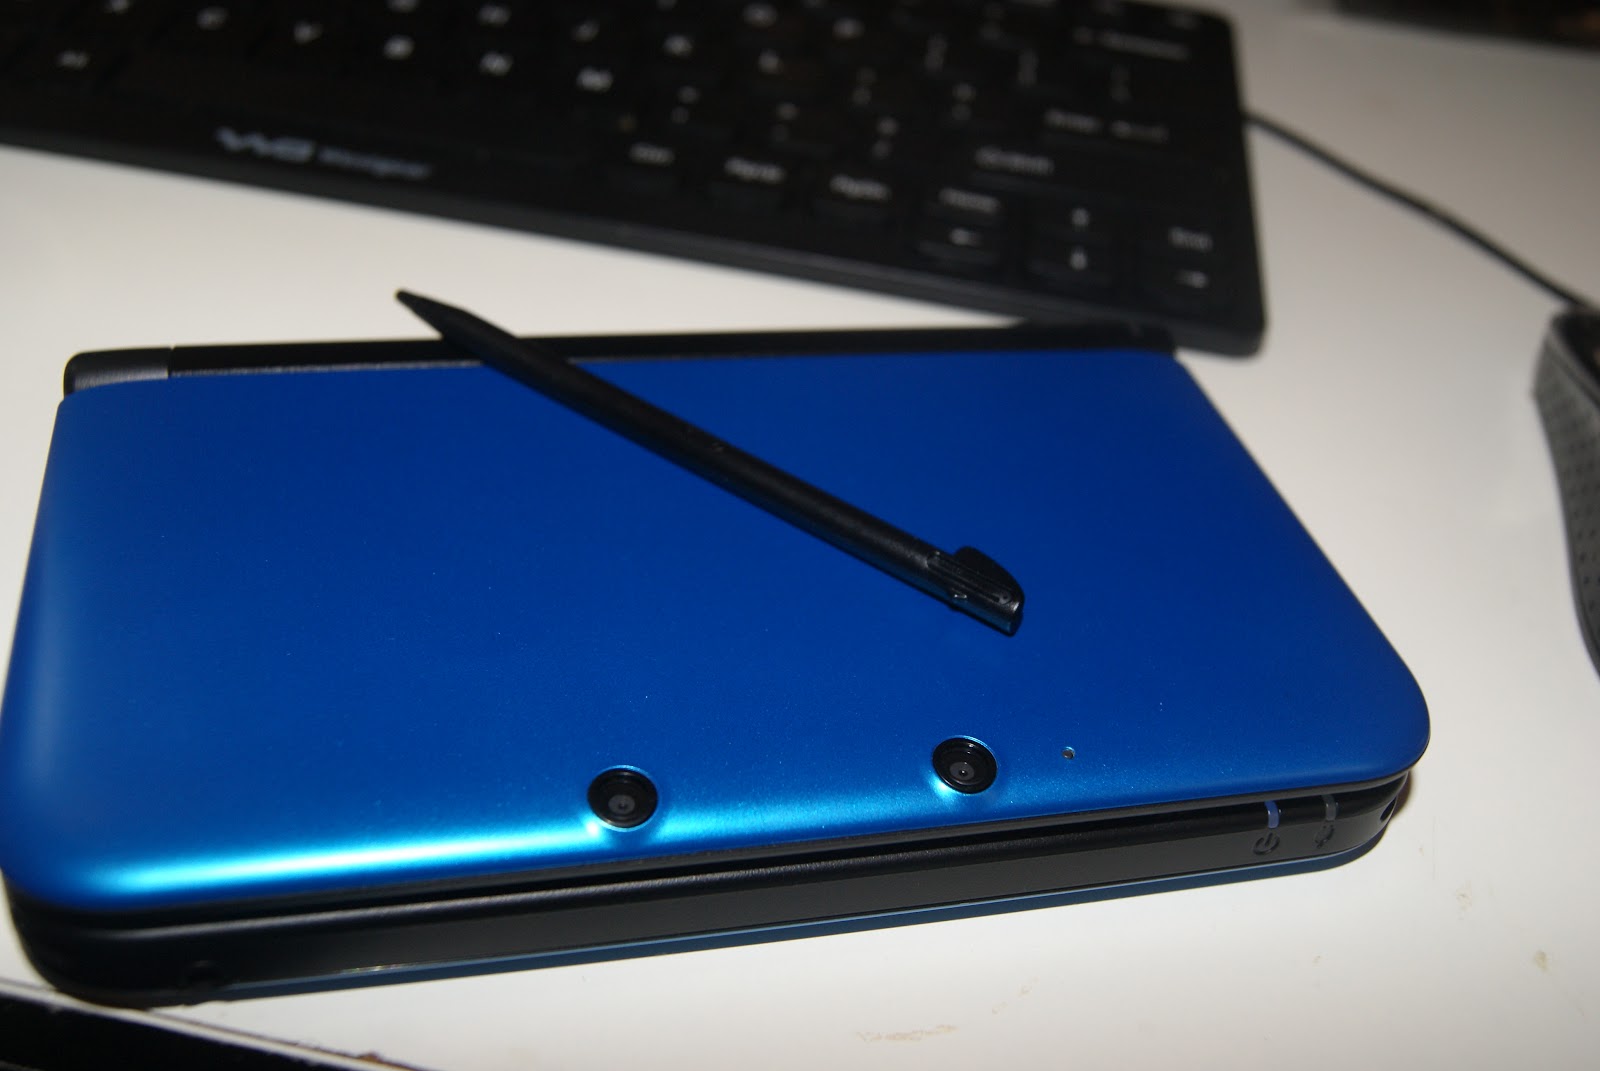 Nintendo Nation Podcast: 3DS XL Review "Makes the Original Look like a